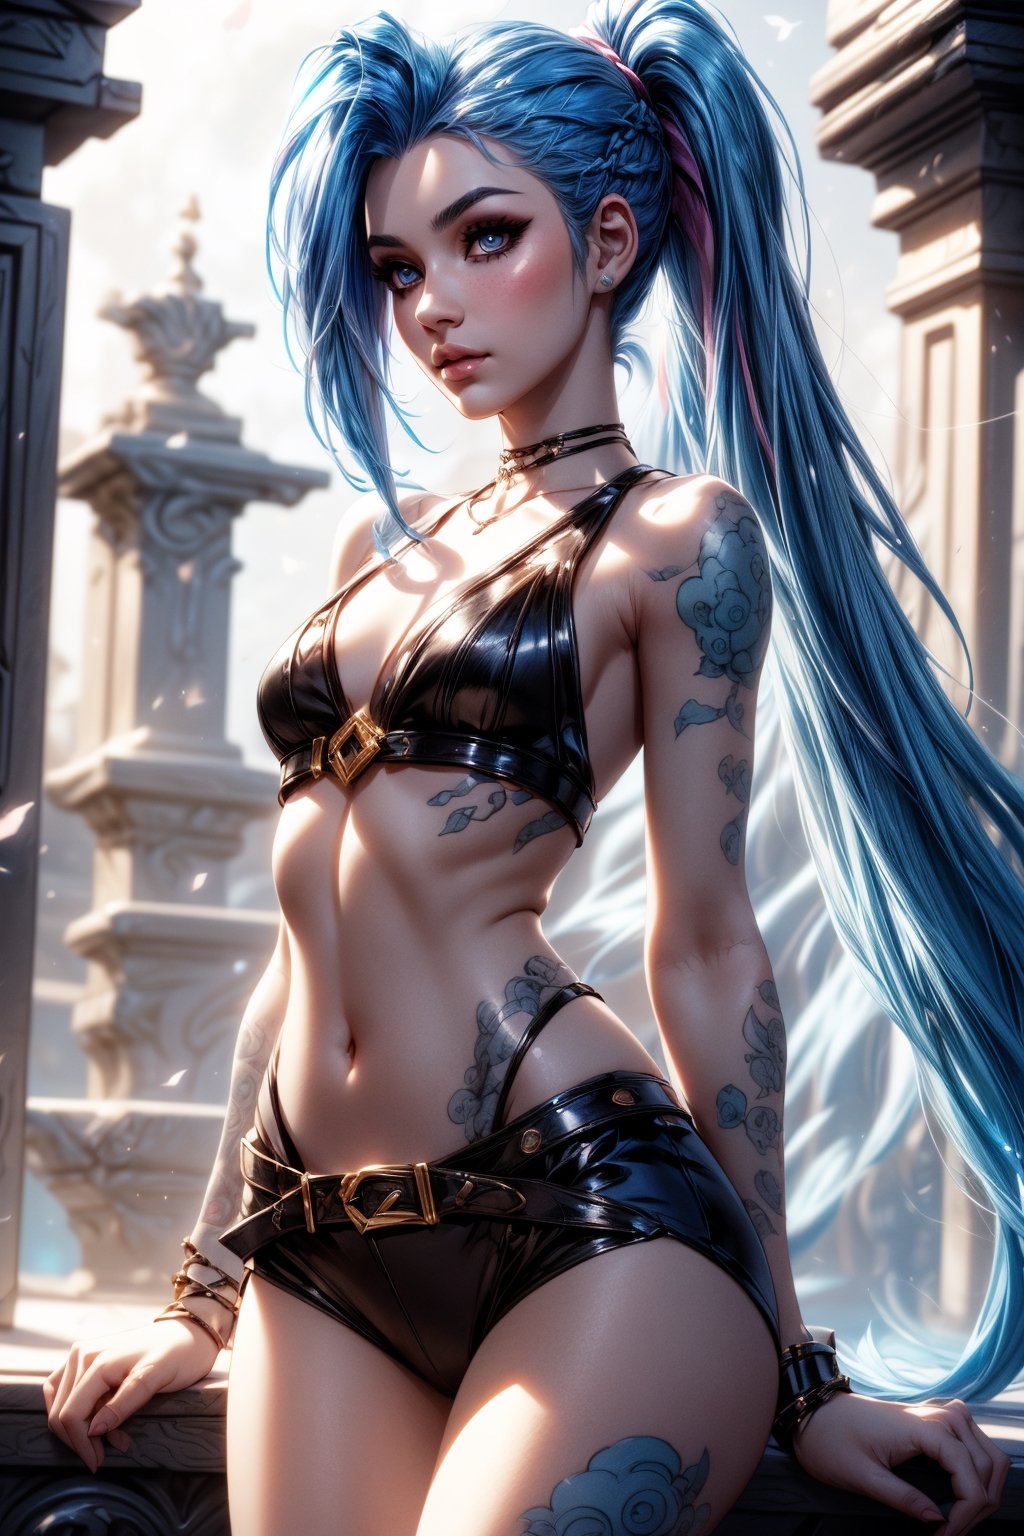 masterpiece,best quality,ultra-detailed,High detailed,Jinx,blue hair,long hair,Double ponytail braid,picture-perfect face,blush,(nymph),(perfect female body,slim thicc),tall,long legs,slim calfs,long legs,(thigh gap),(blue hair),goddess,charming, alluring,seductive,enchanting,makeup, fantasy,nature,pure,serene,supernatural beauty,
more detail XL,ani_booster,1 girl,JinxLol,jinx (league of legends)